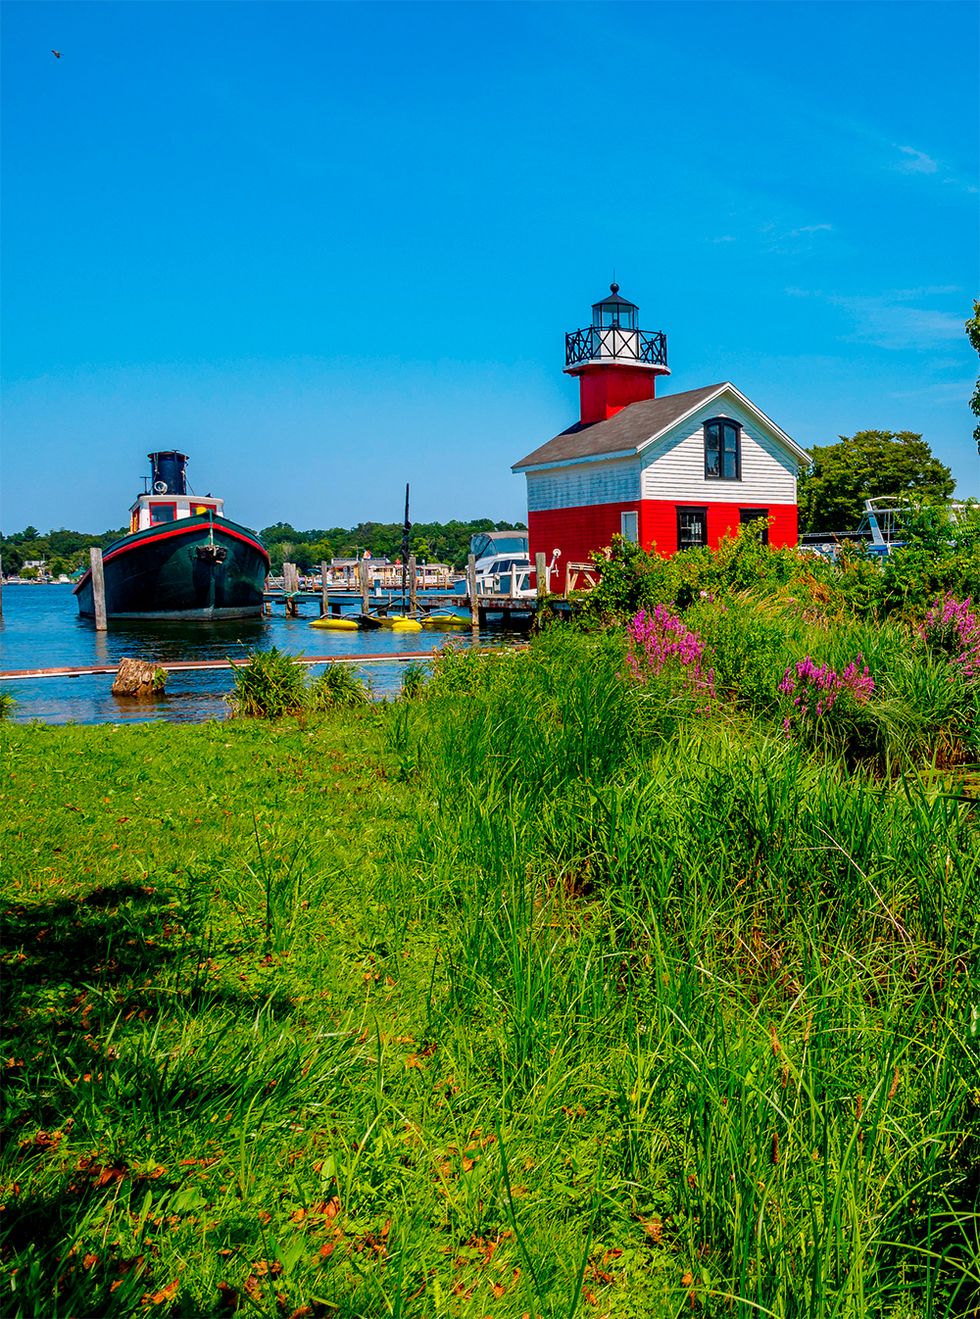 red lighthouse next to black tugboat in saugatuck michigan